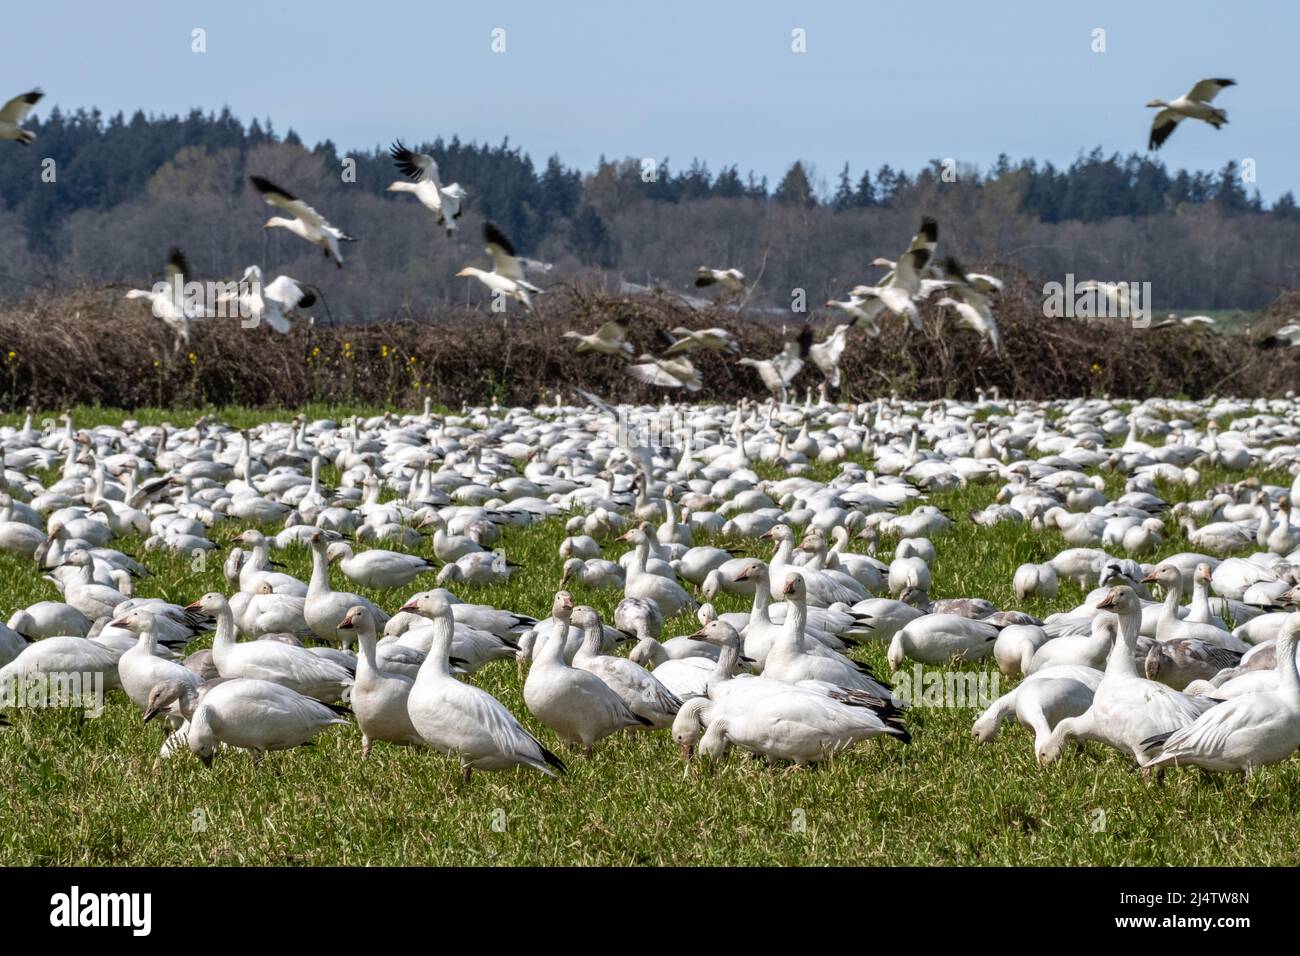 snow geese flock at their winter home in the Skagit River Delta in Western Washington State, USA Stock Photo